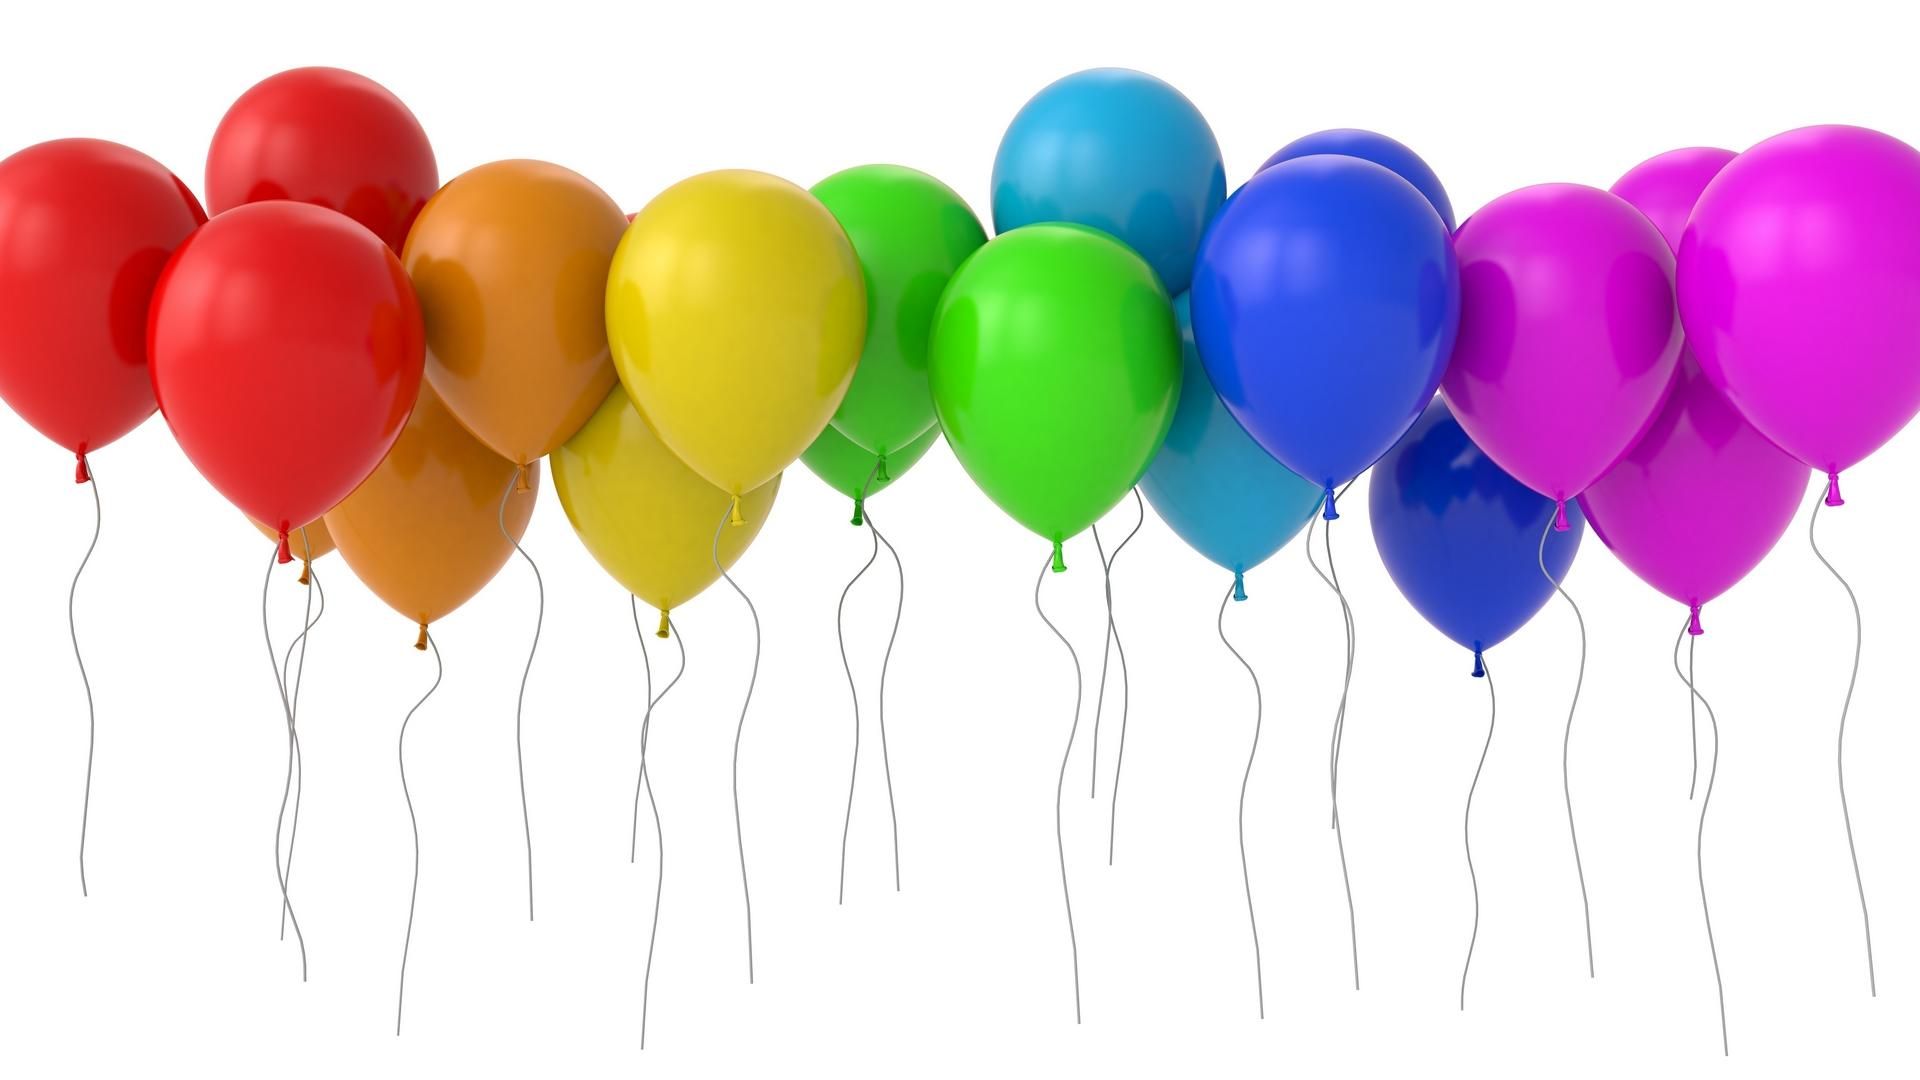 Colorful Balloons Wallpapers 8 | HD Wallpapers | Pinterest | Hot air ...